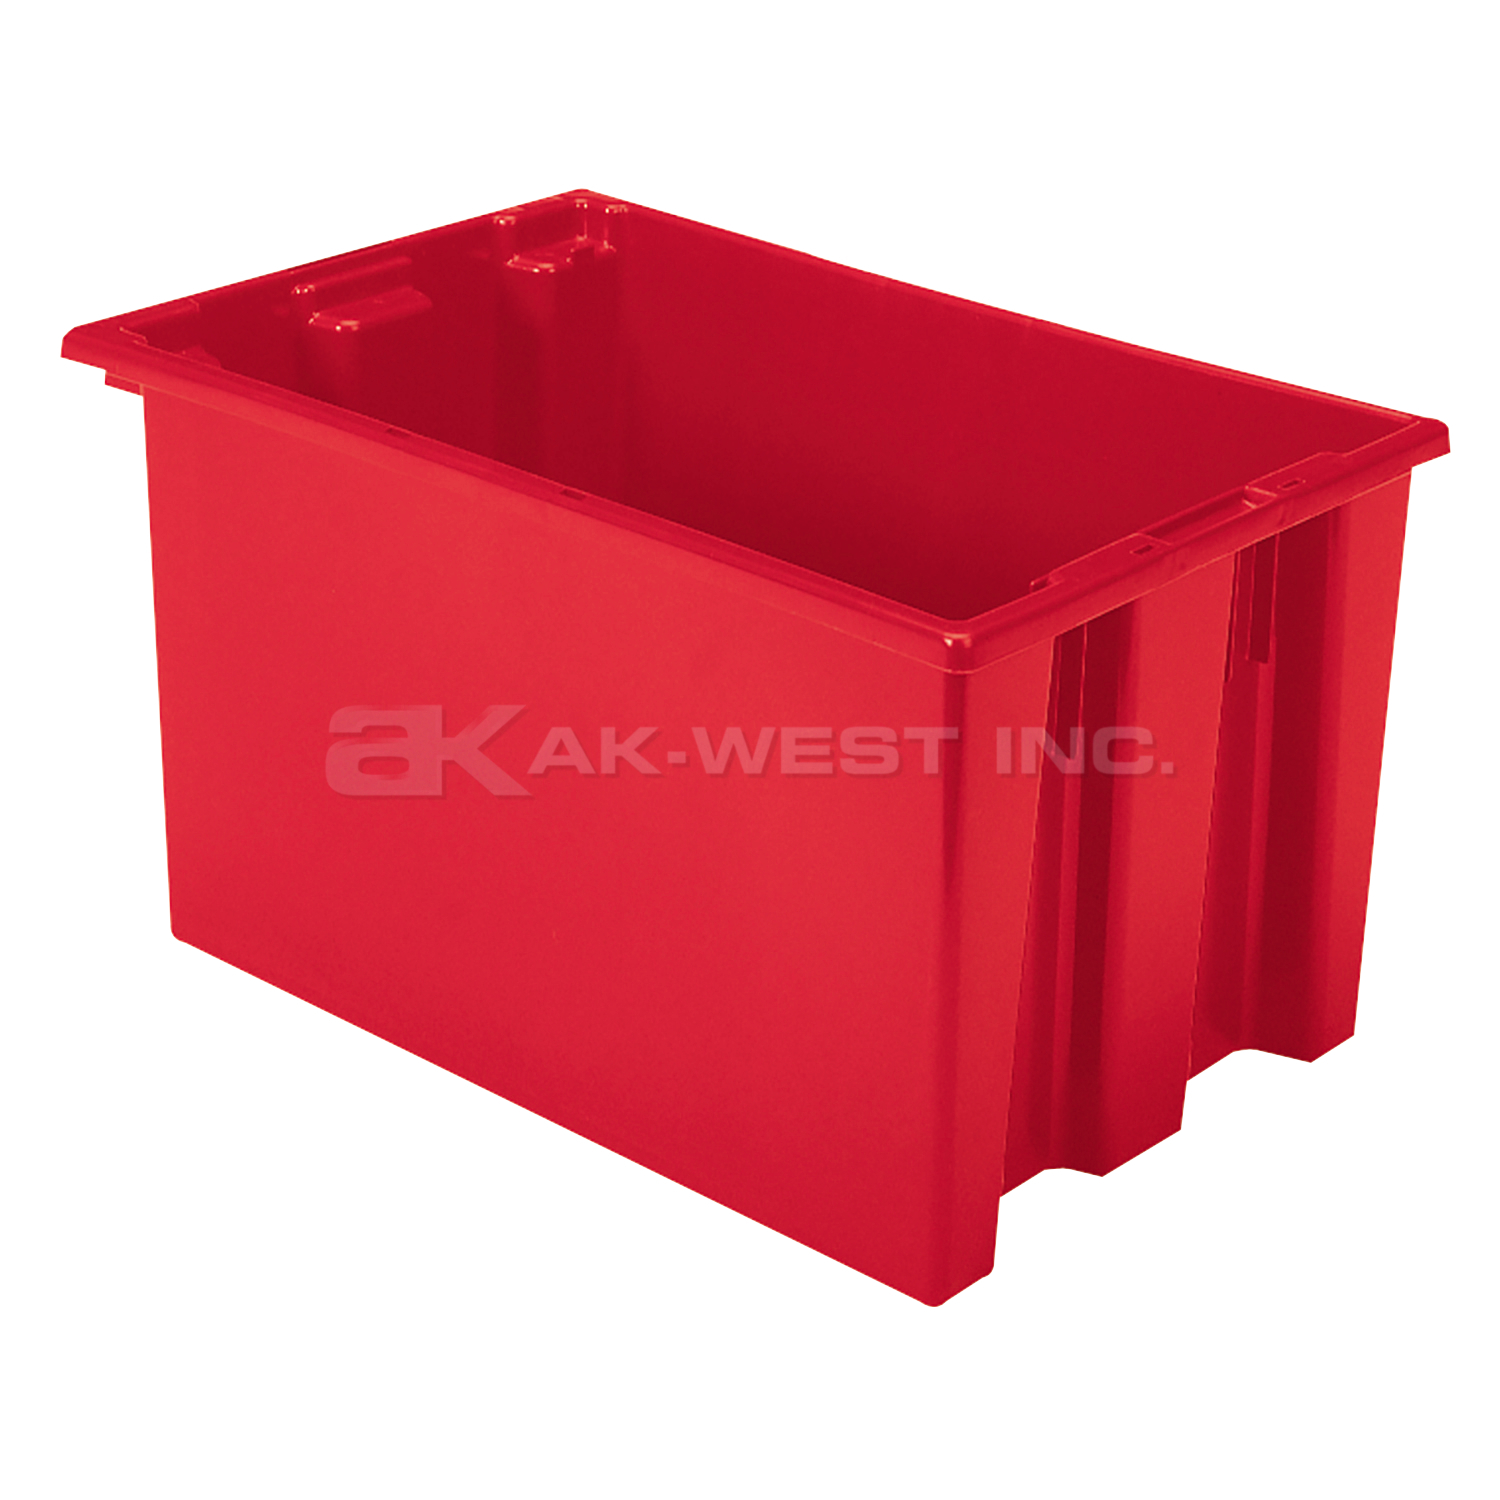 Red, 23-1/2" x 15-1/2" x 12" Nest and Stack Tote (3 Per Carton)